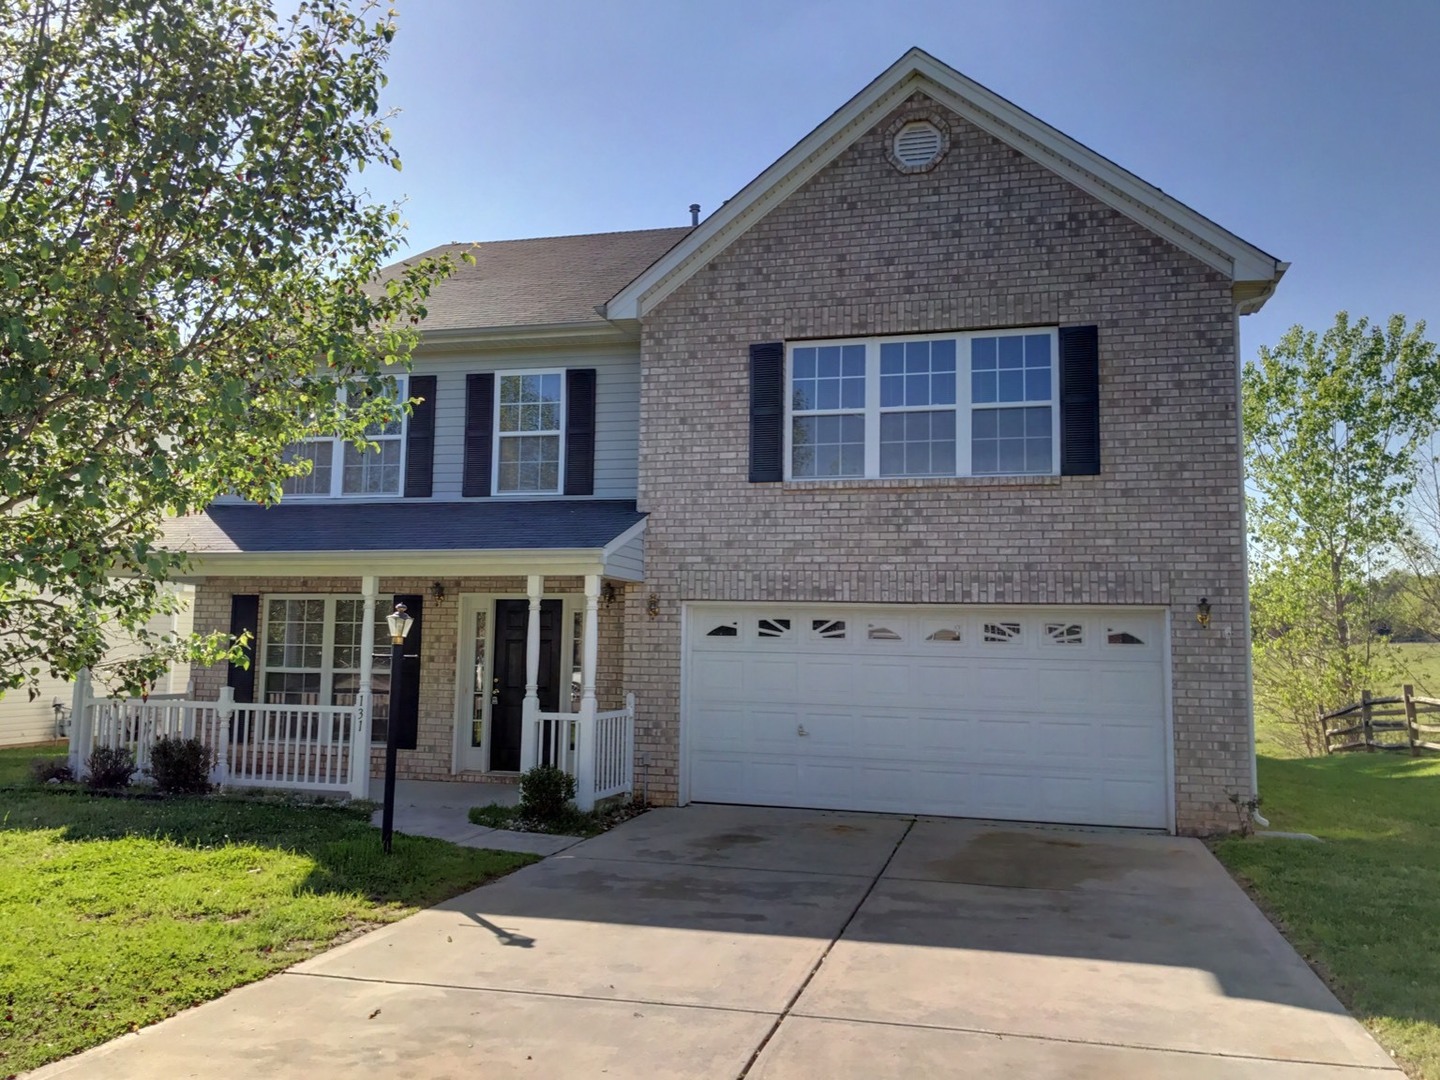 Beautiful 4 Bedroom, 2.5 Bathroom Home - Desirable Curtis Pond Community - Mooresville City Schools - Community Pool and Playground